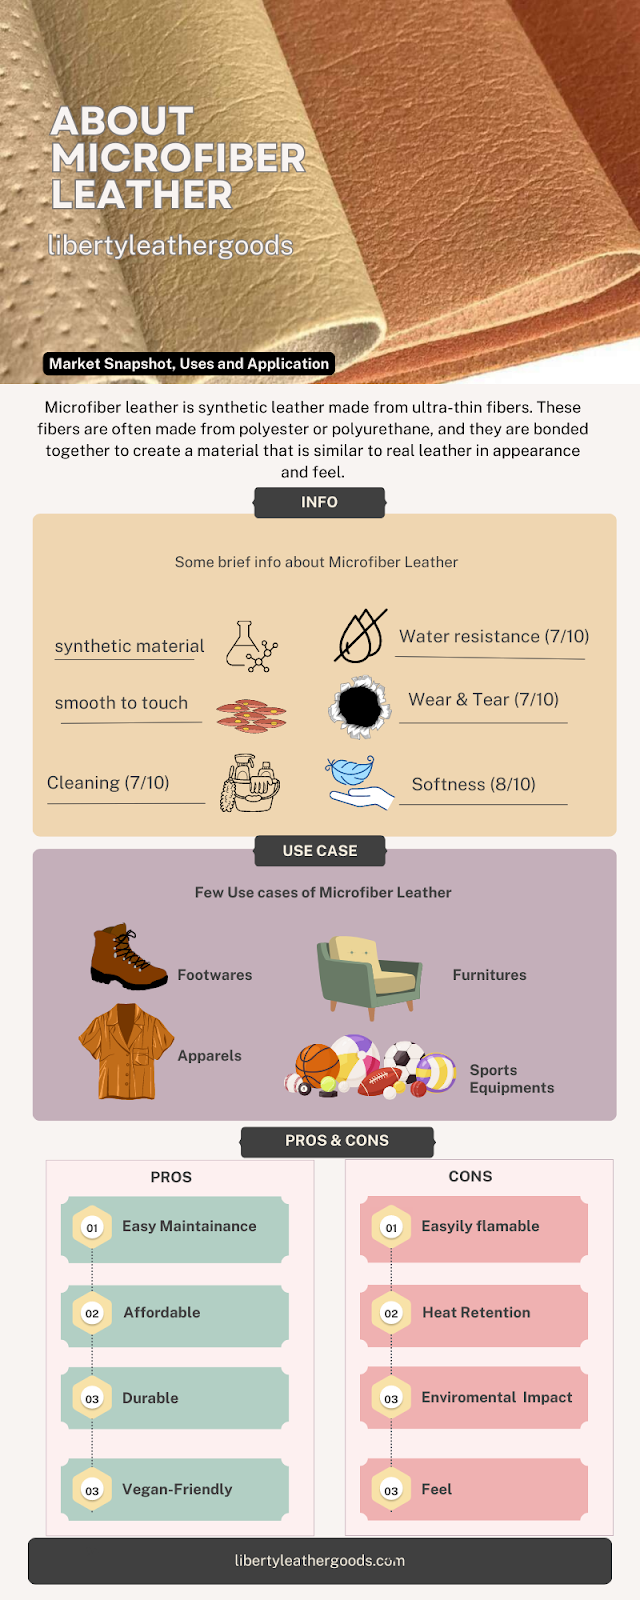 Pleather - Fun Facts, Uses, and Characteristics